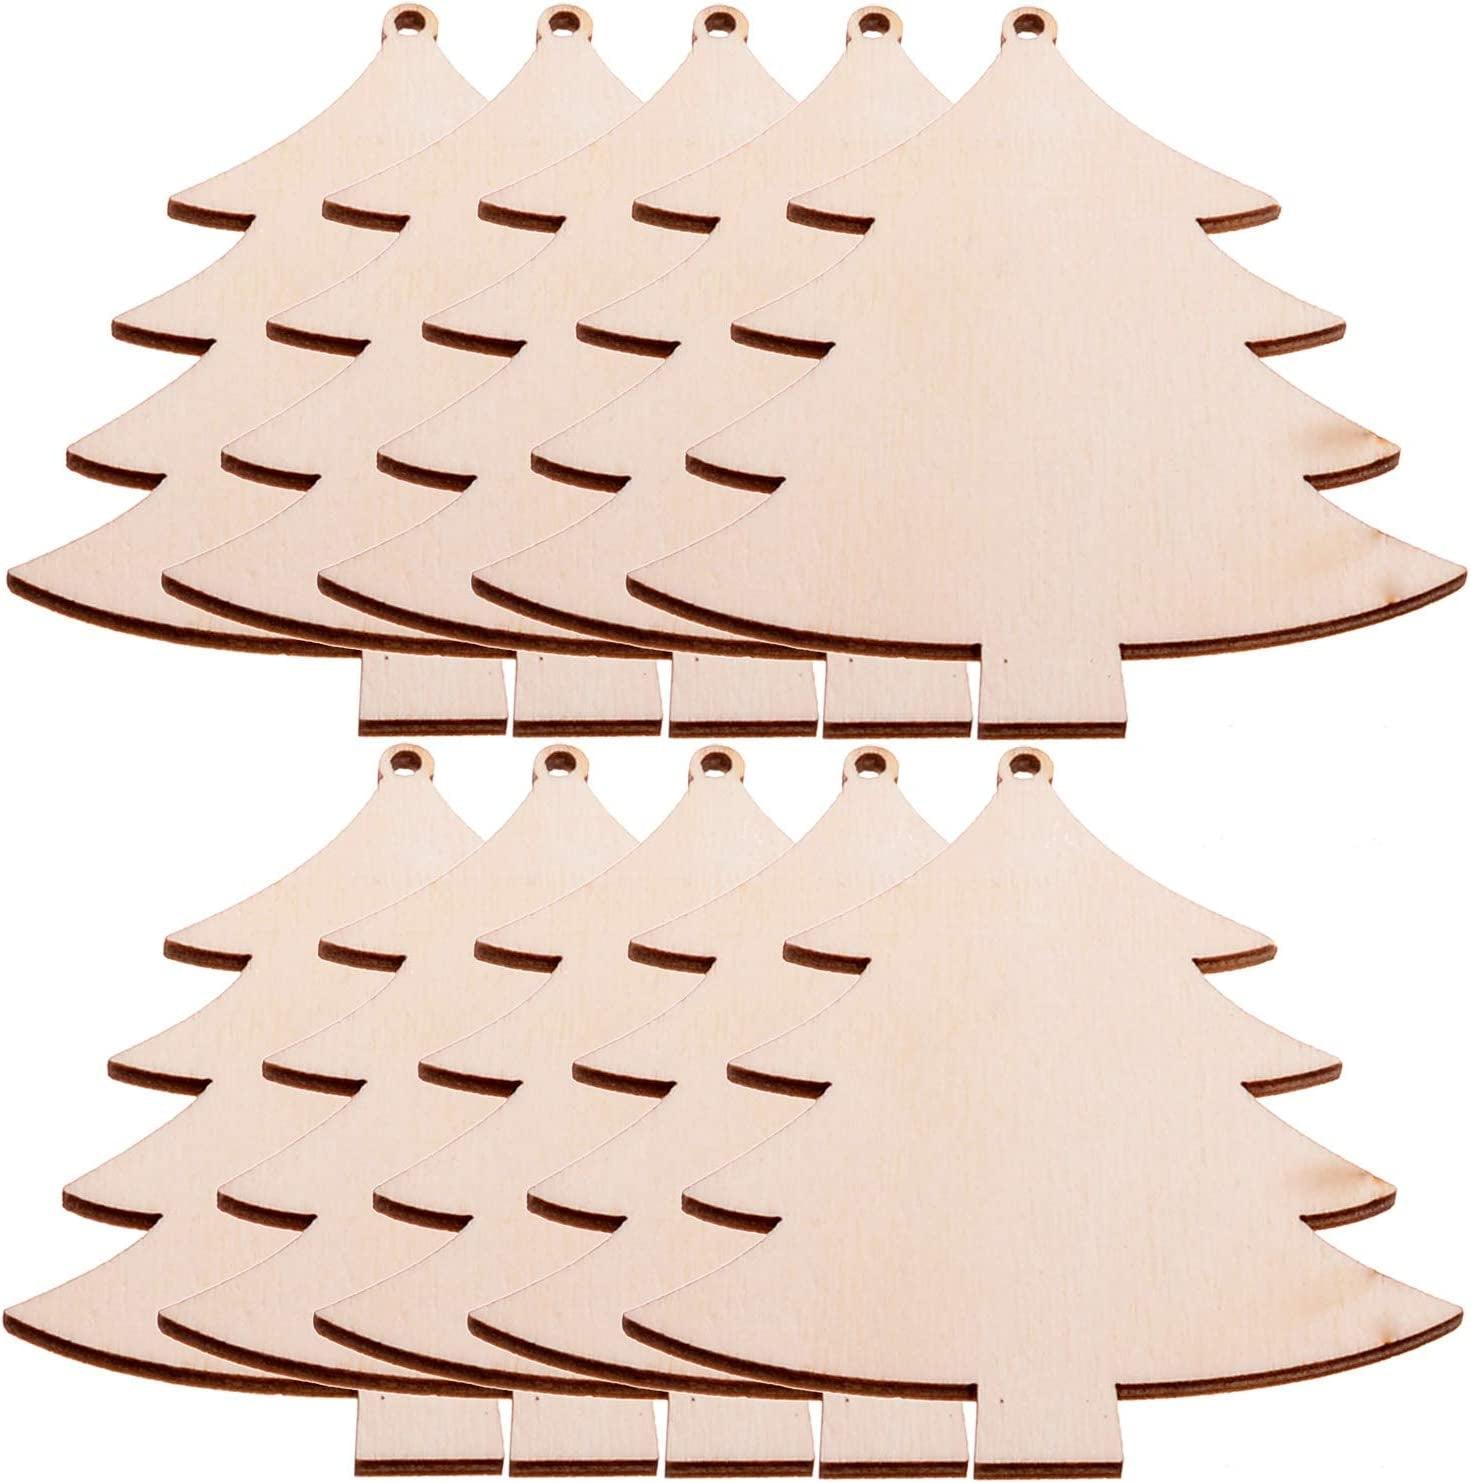 10pcs Wooden Crafts to Paint Christmas Tree Hanging Ornaments